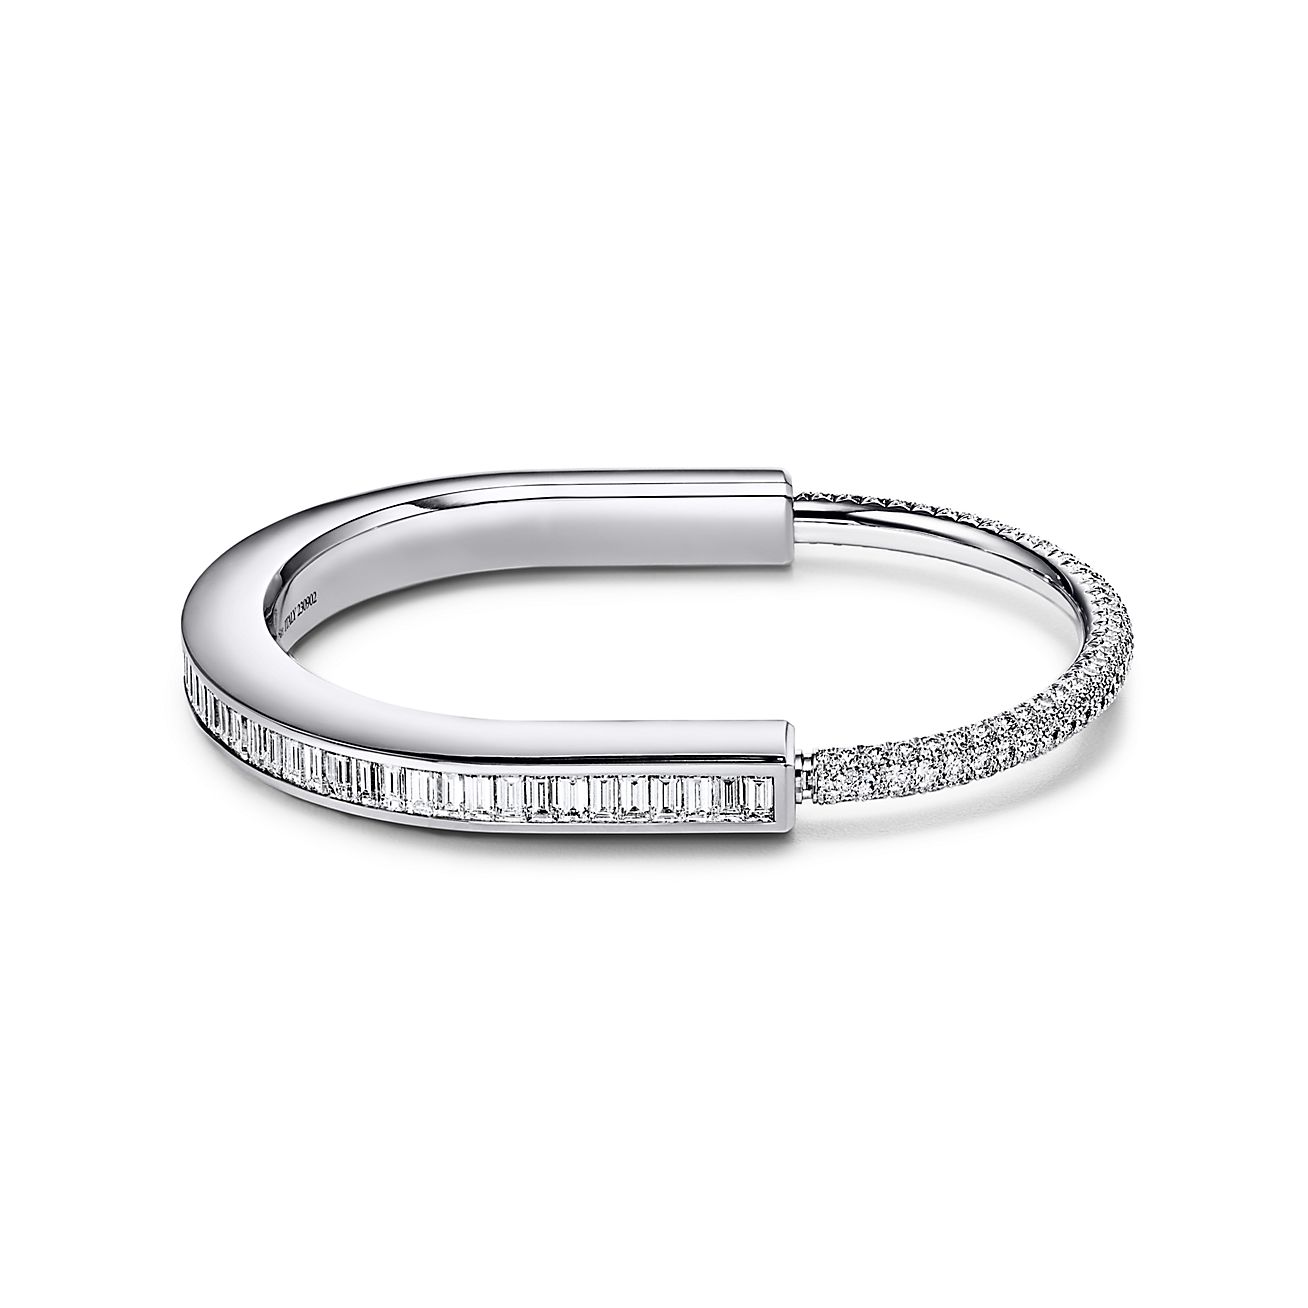 What are the Most Common Types of Bracelets & Bracelet Clasps - Dusoul -  Blog